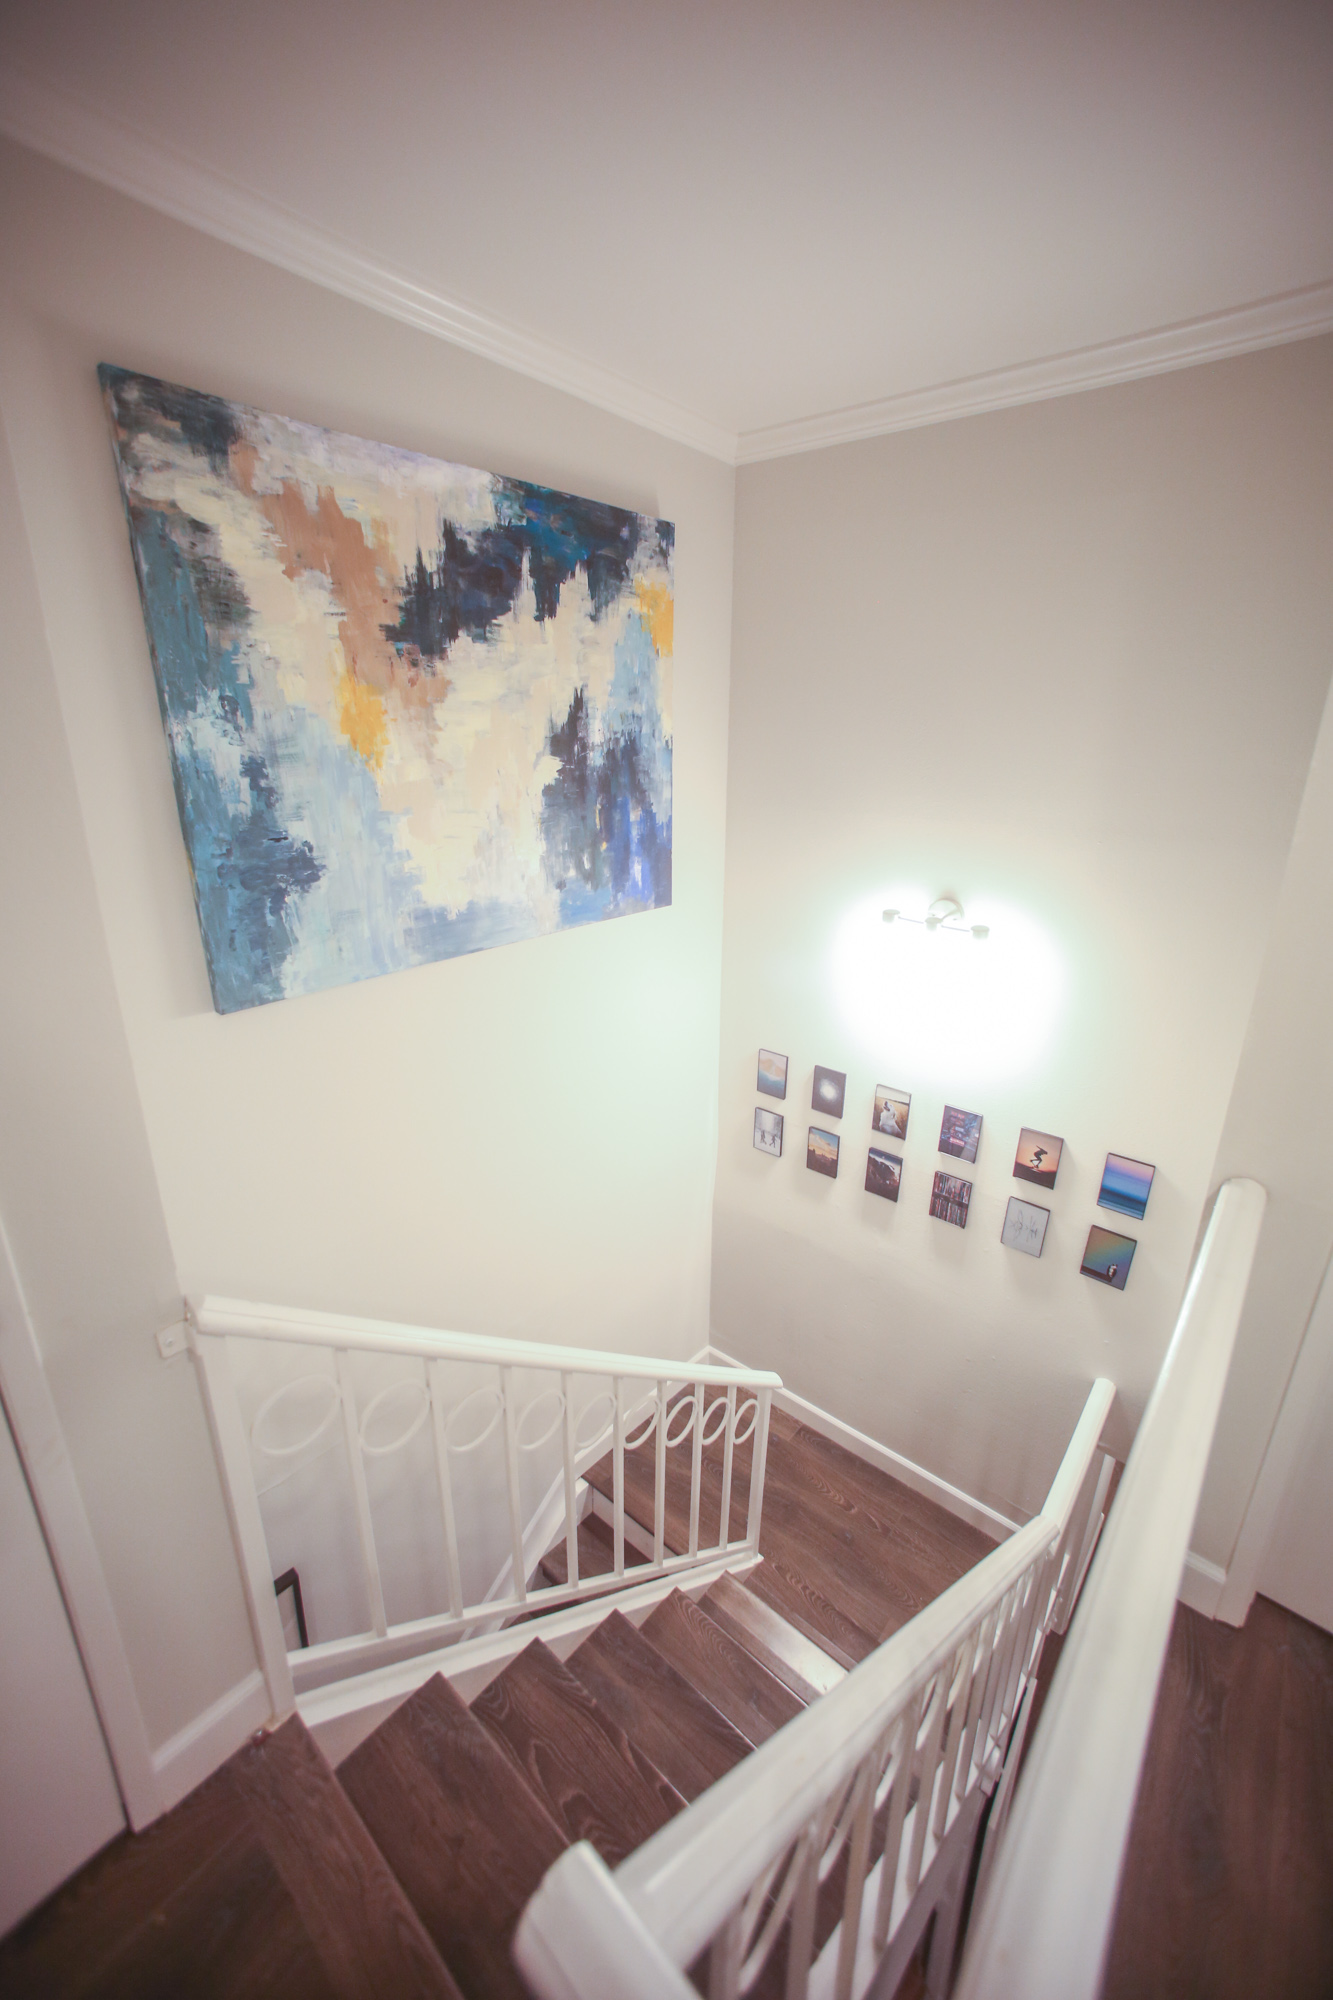  Stairwell with photos and a large 5' x 4' canvas I painted 